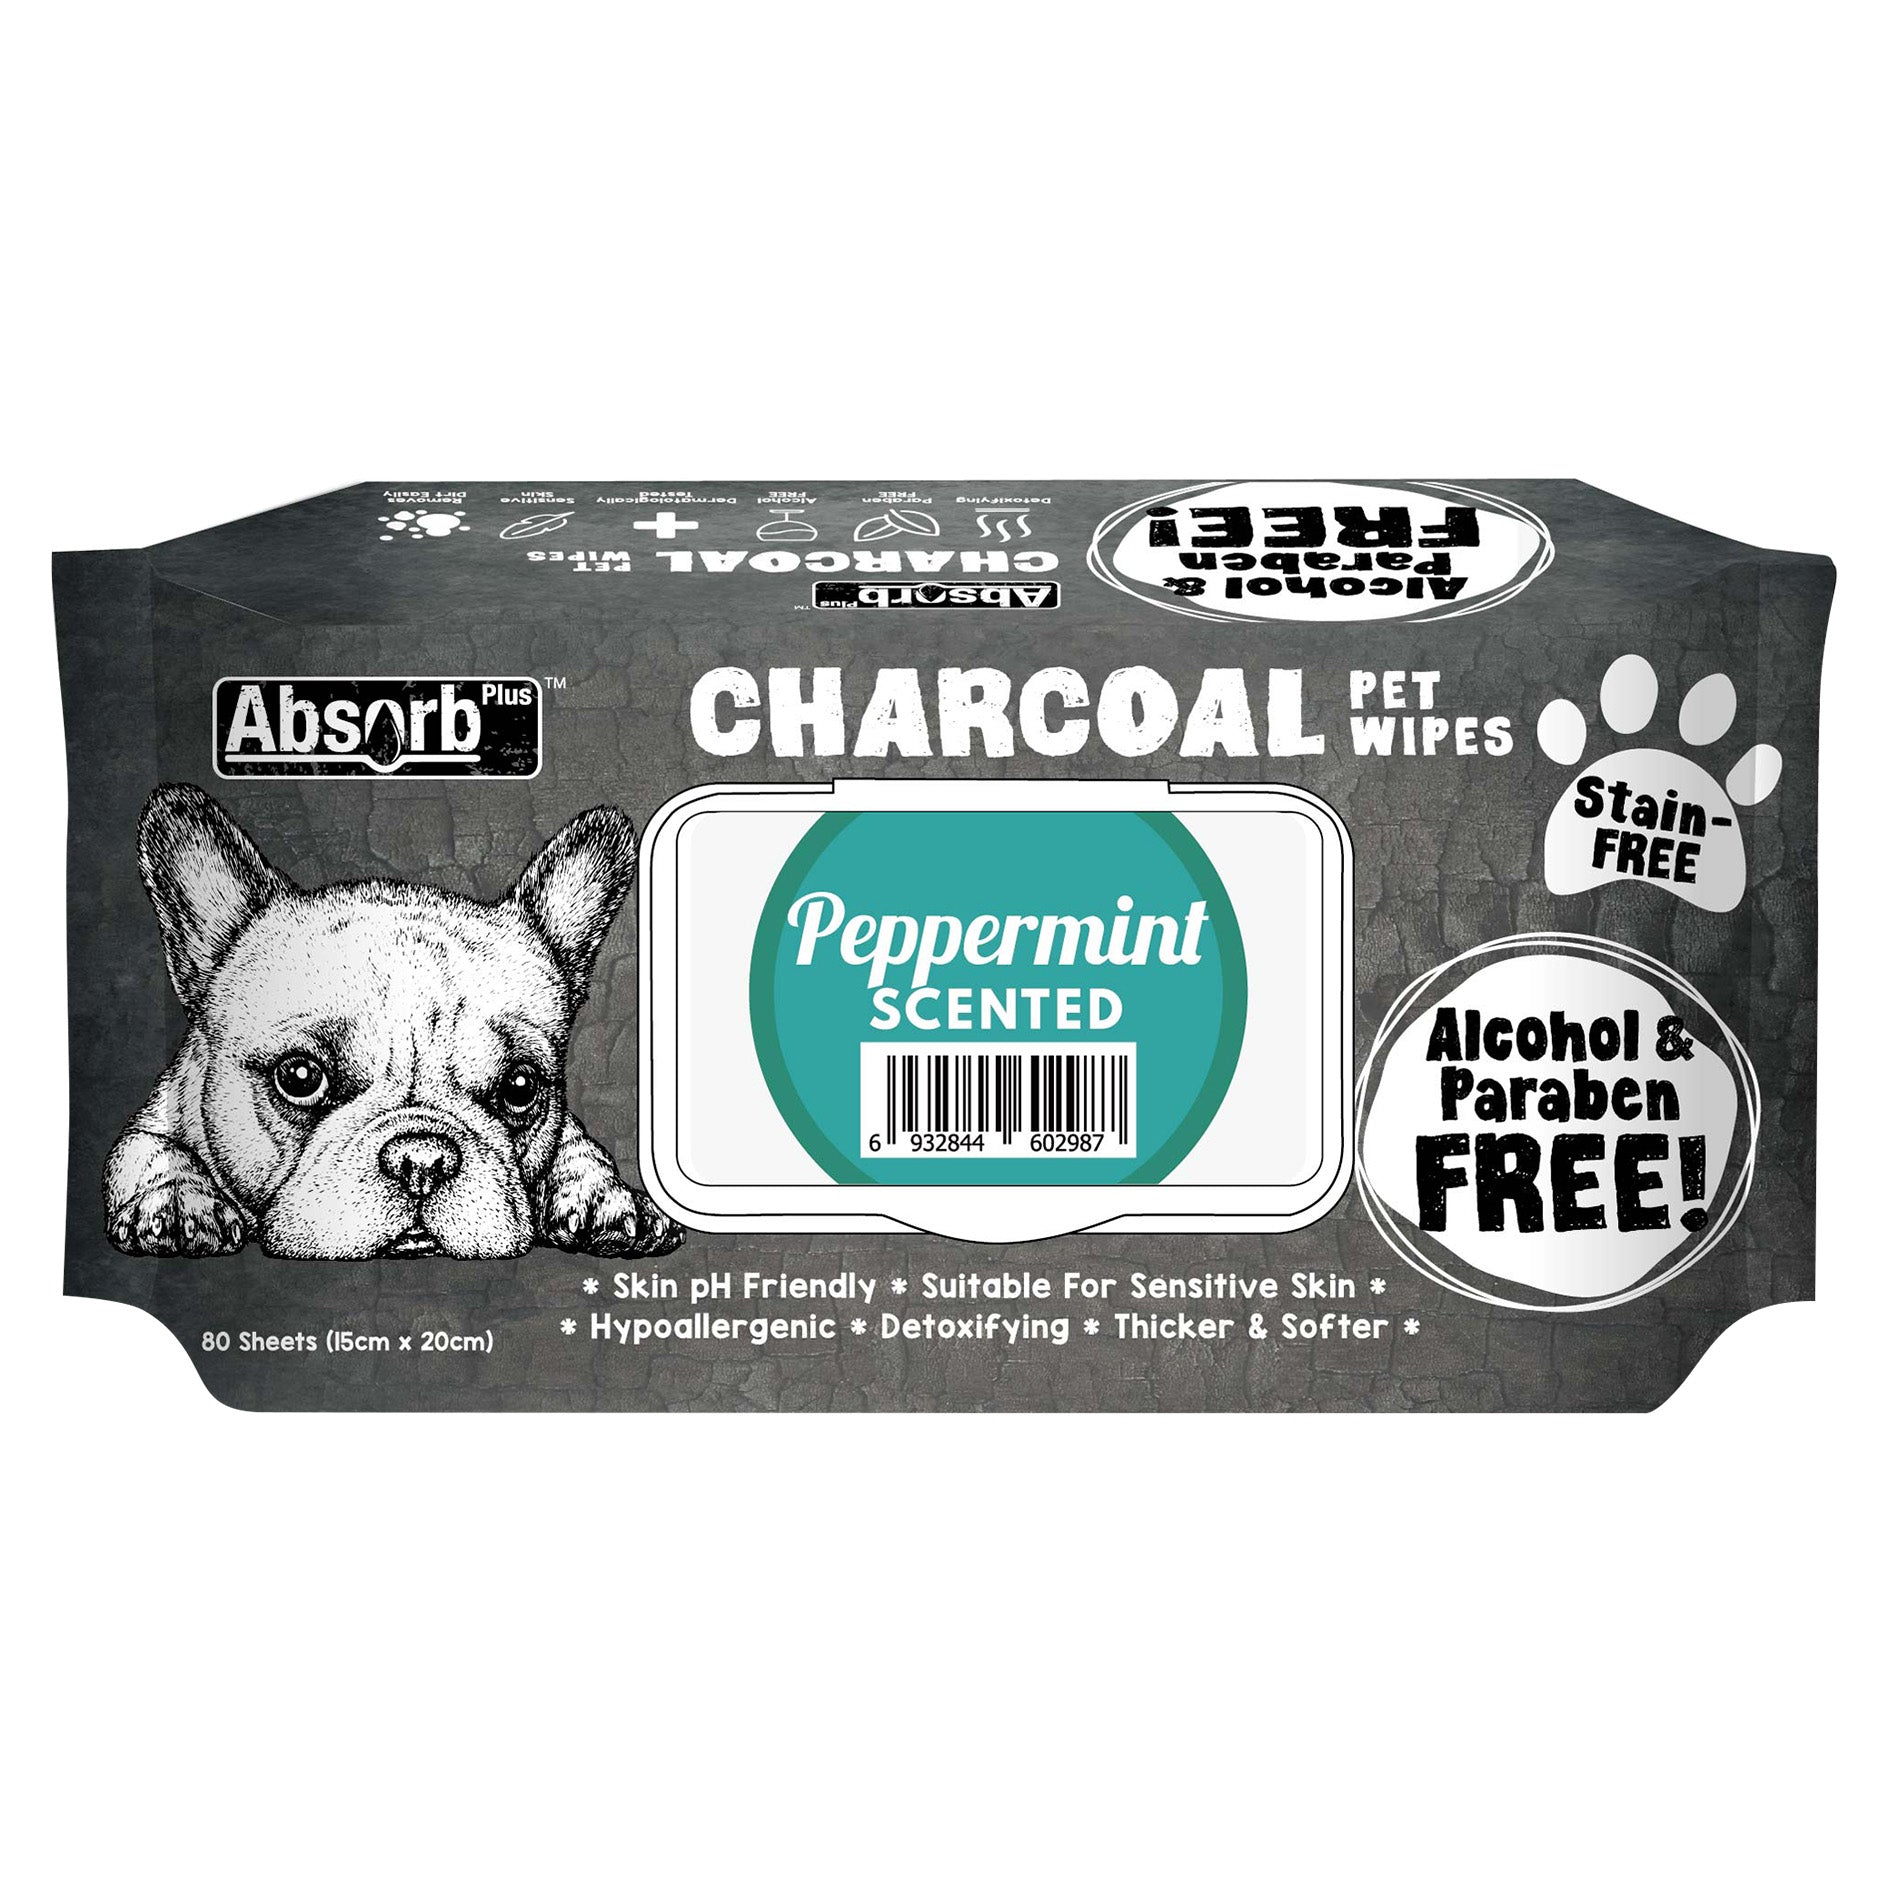 Absorb Plus Charcoal Wet Wipes - Peppermint (6968589451425)